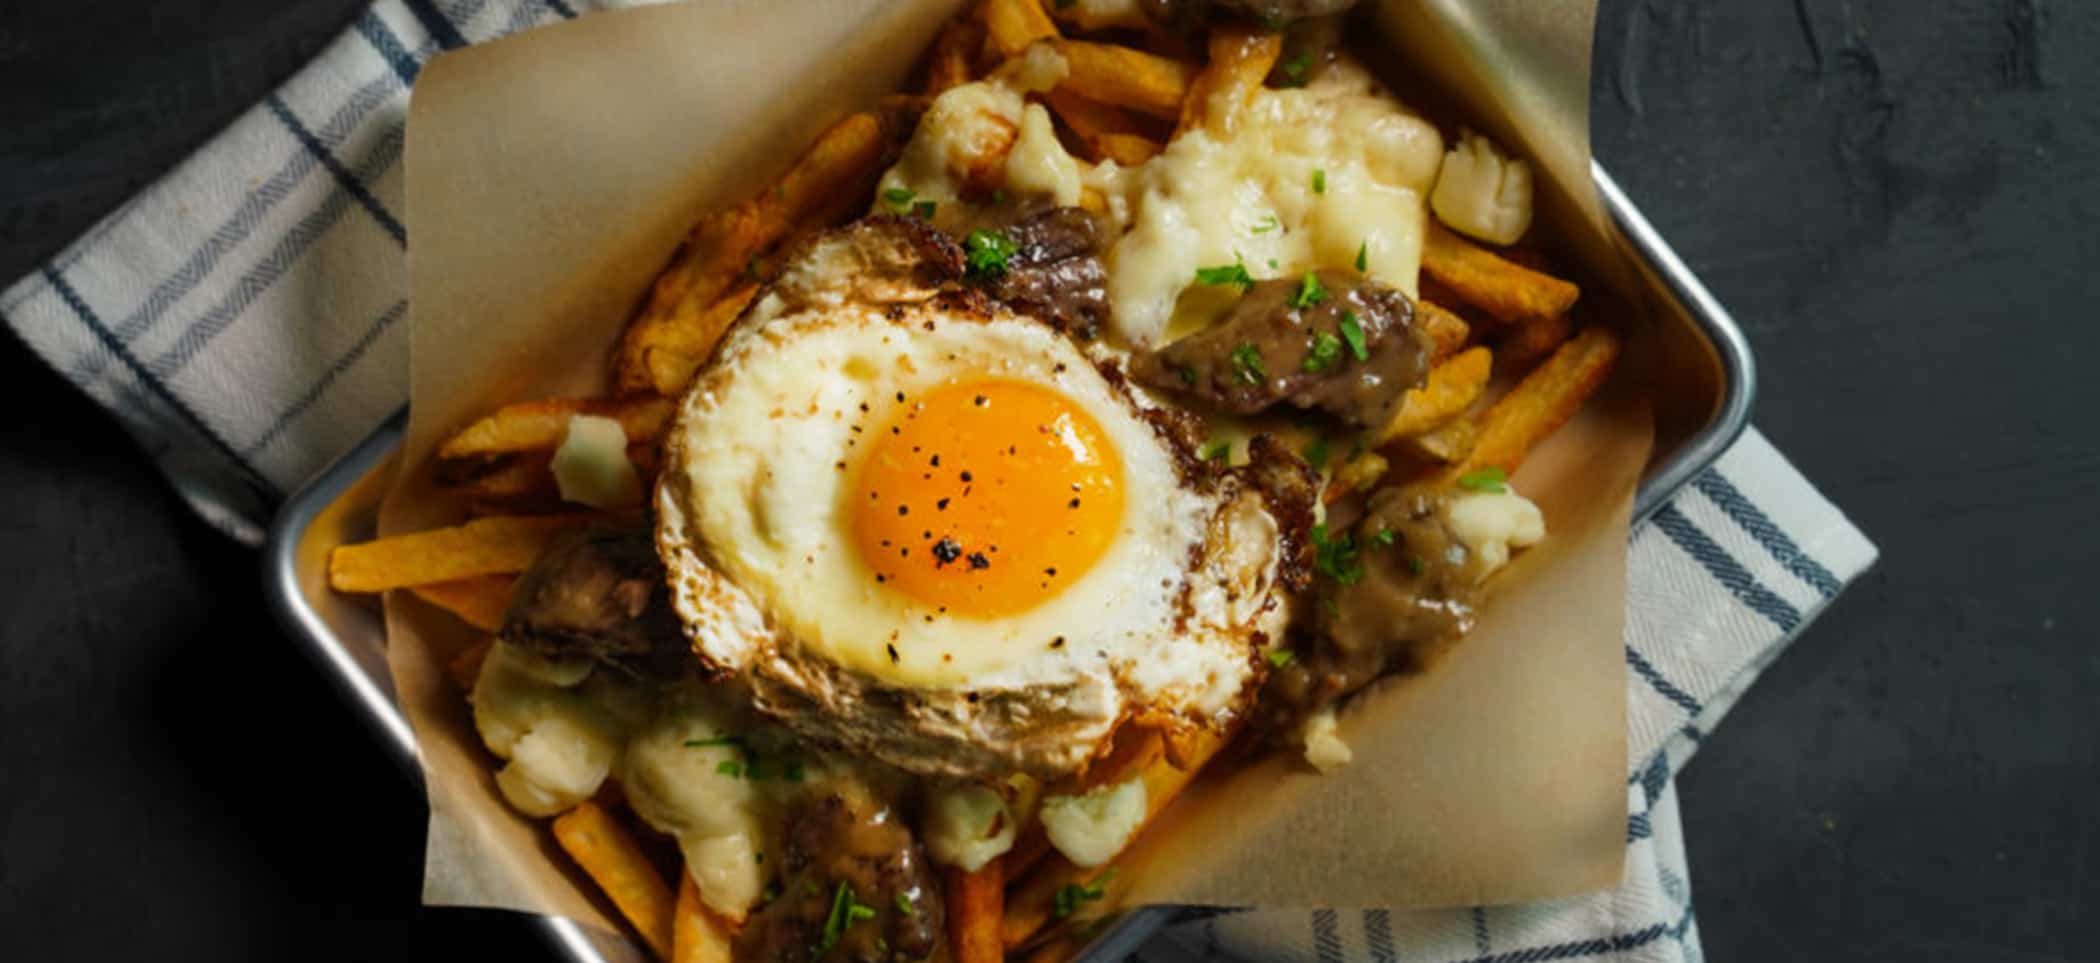 Short Rib Poutine with a Fried Egg